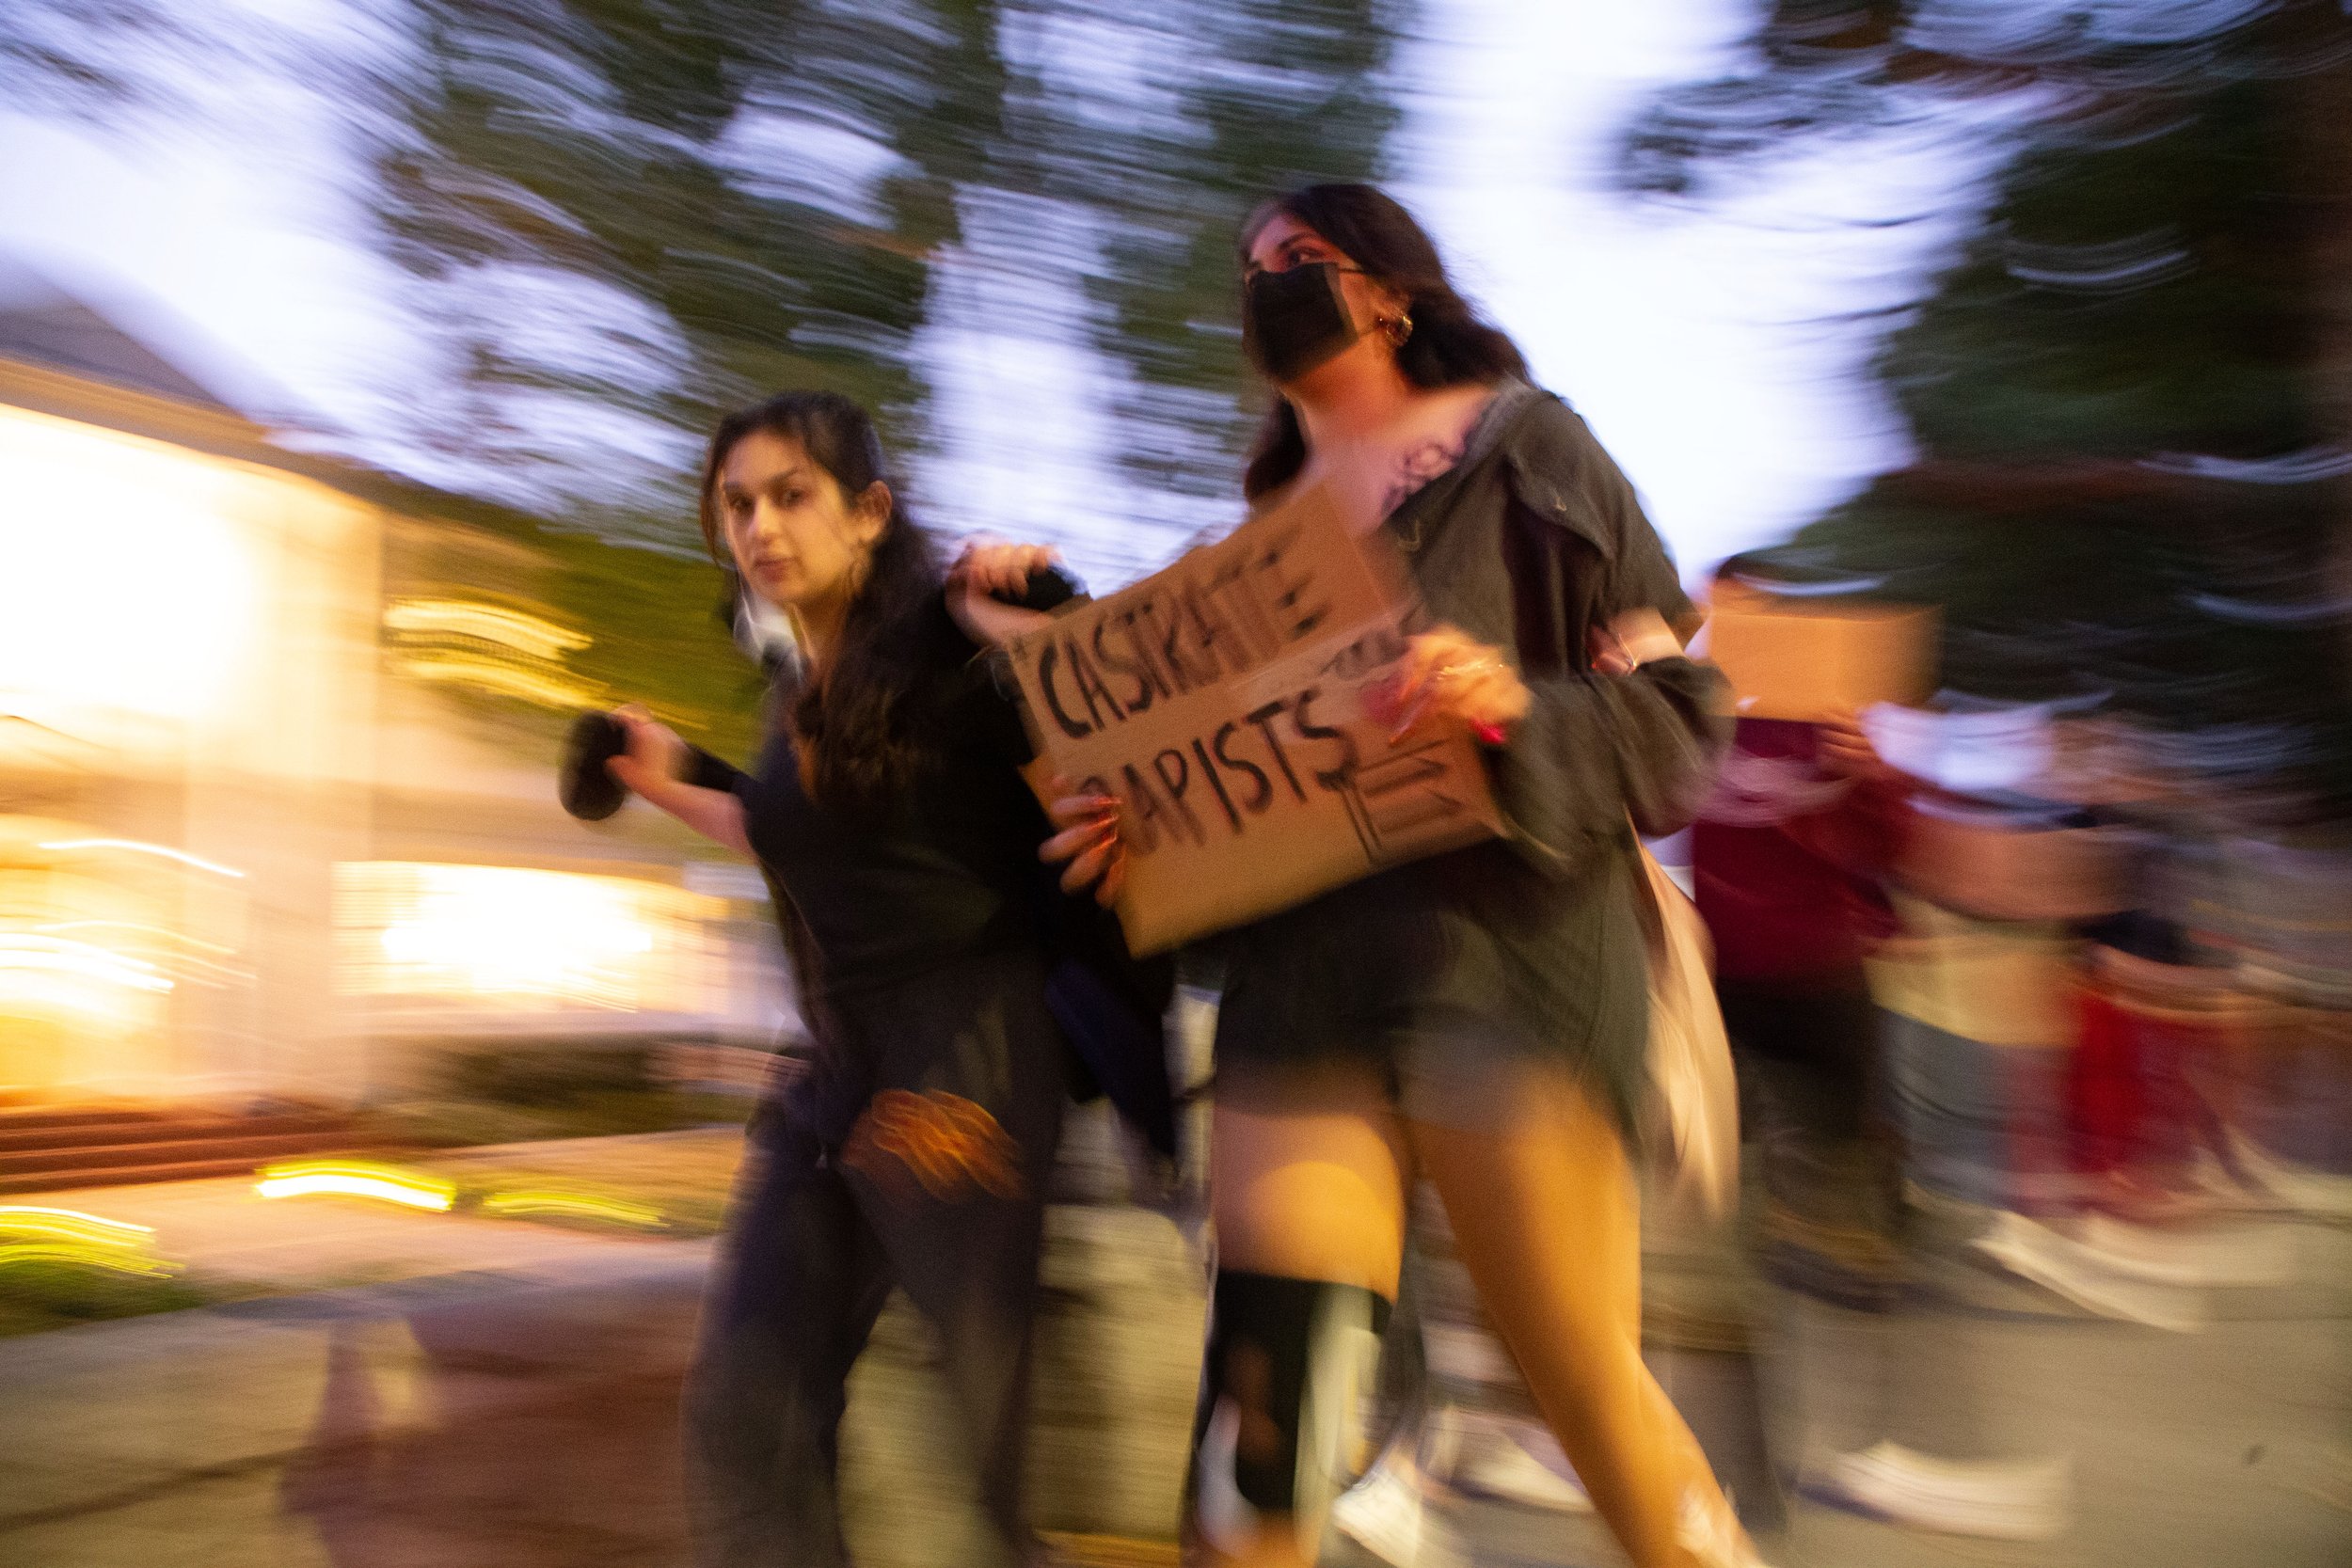  Students walk from the USC village to the Sigma Nu Fraternity house on Oct. 22, 2021. Hundreds of USC students participated in the protest after the fraternity was placed on suspension for numerous reports of sexual assault occurring at the house. (